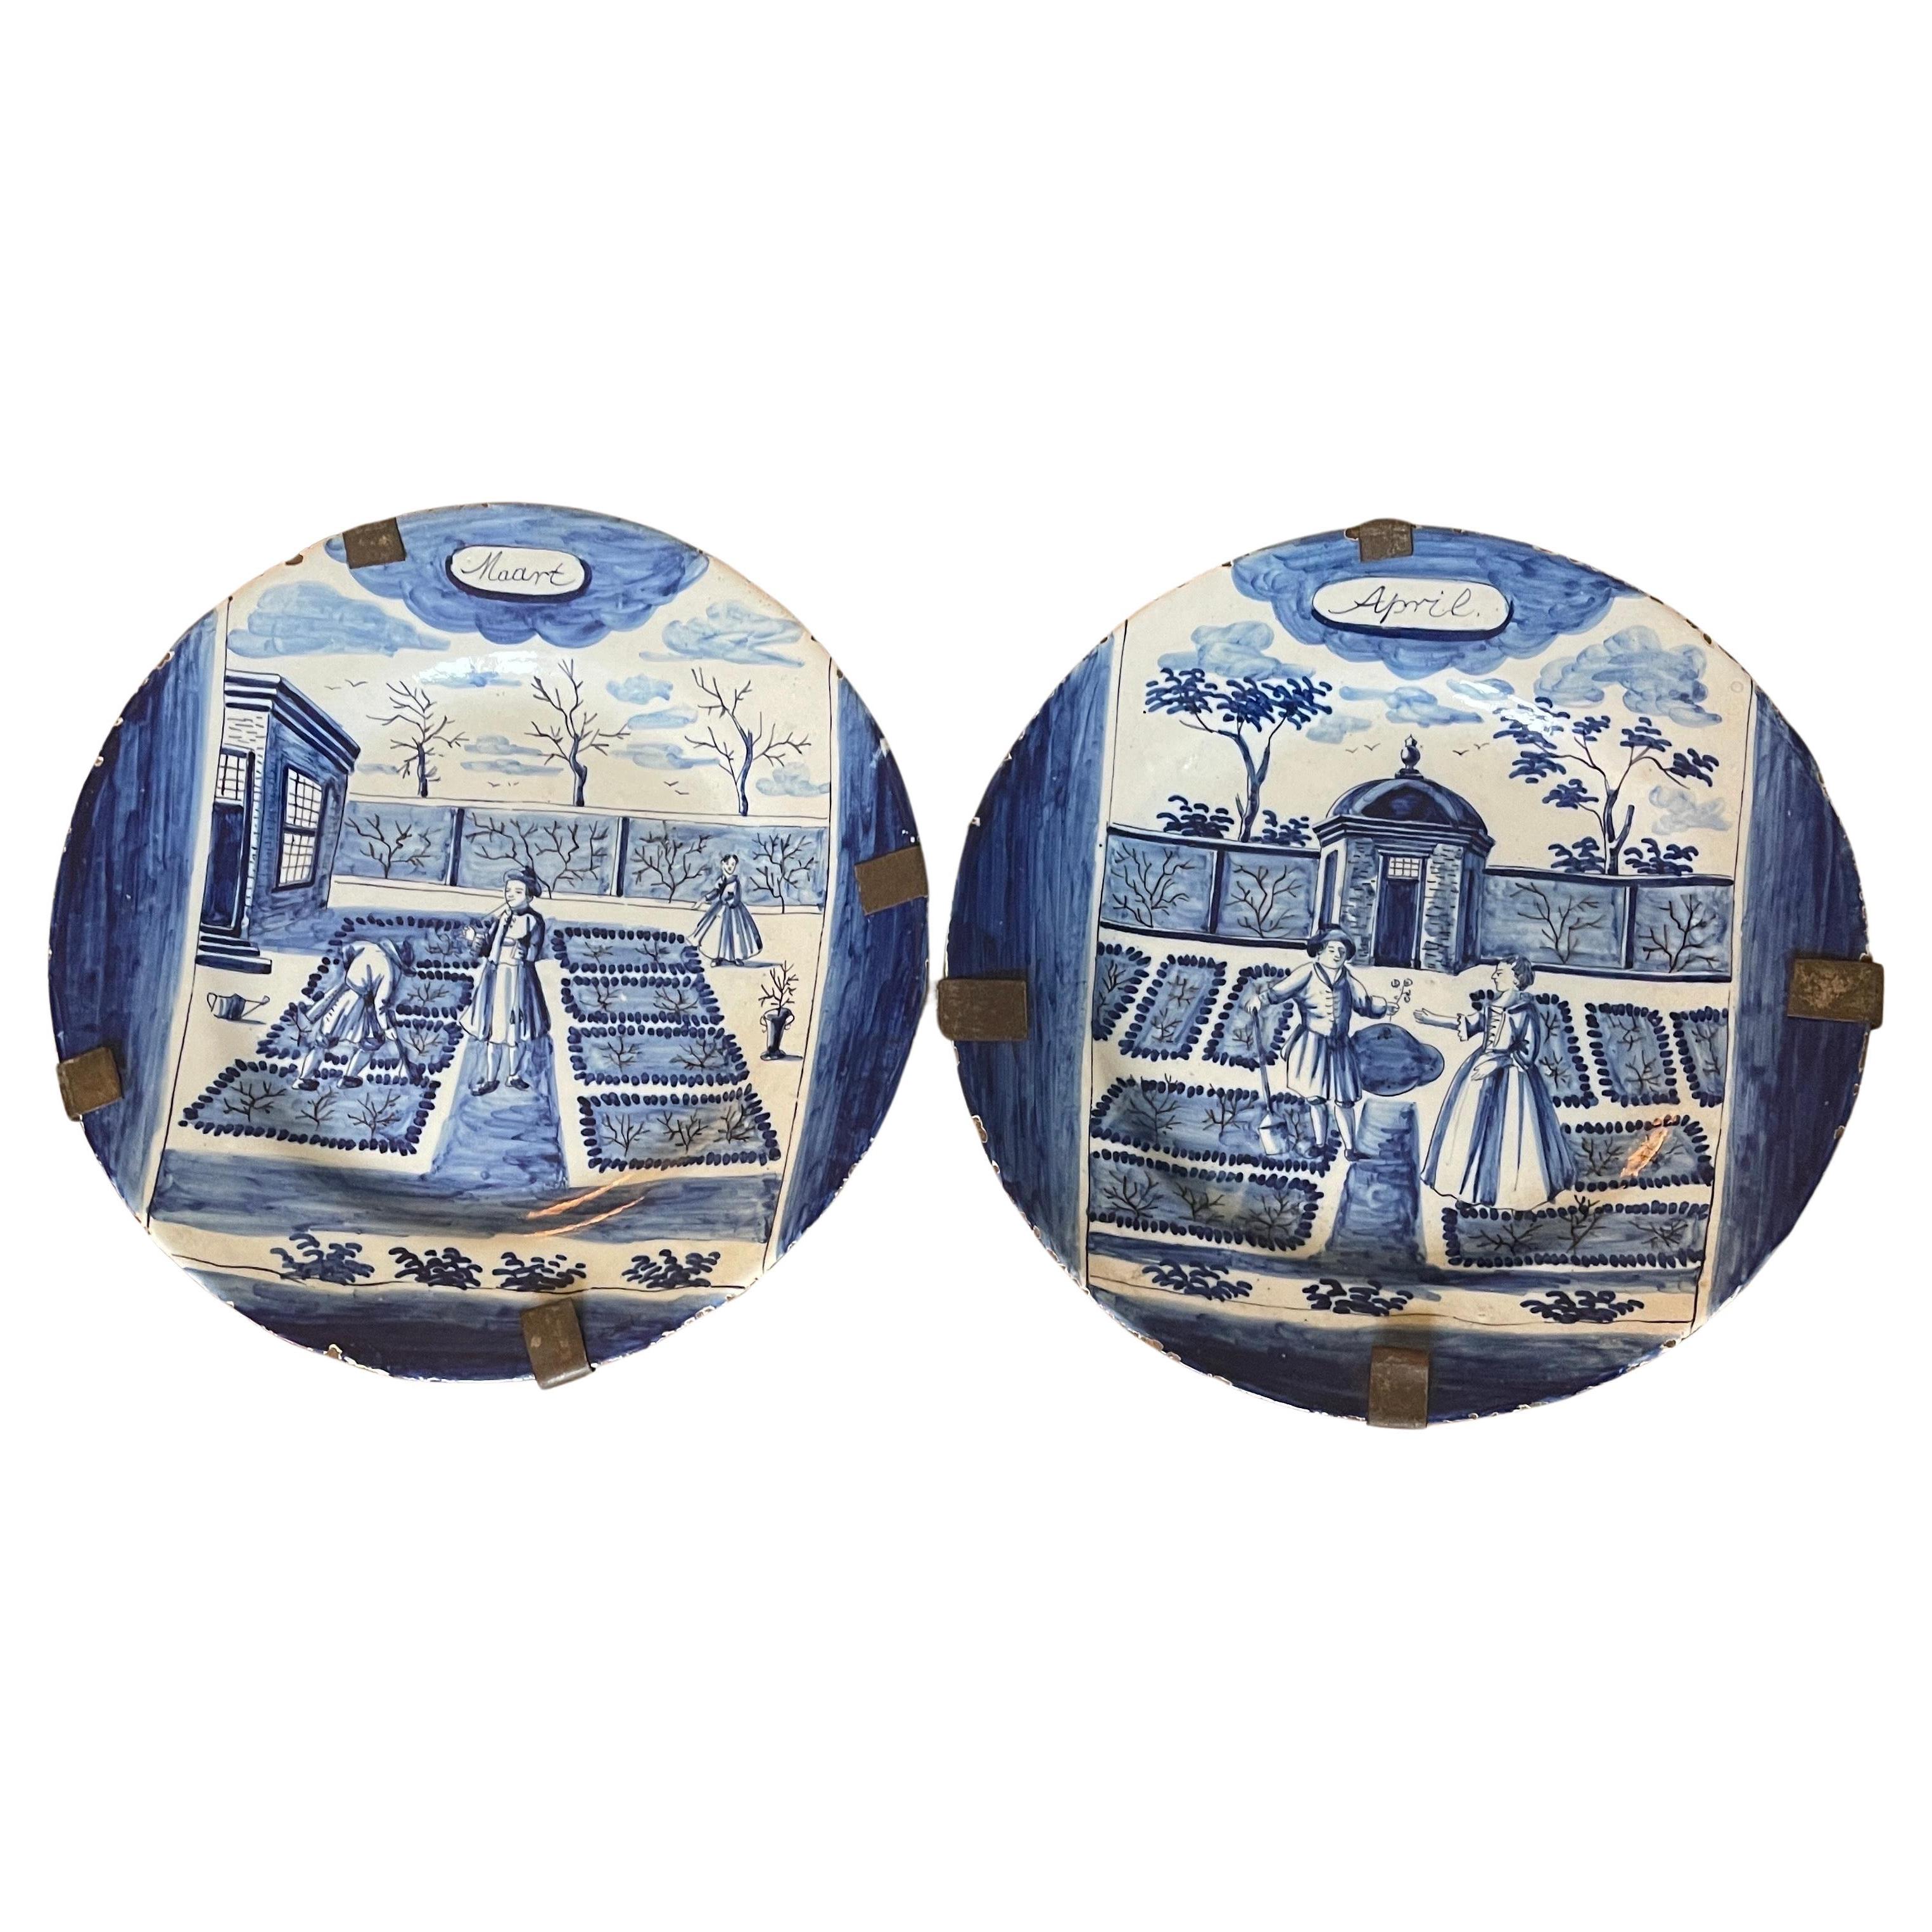 Pair of Blue and White Delft Calendar Plates